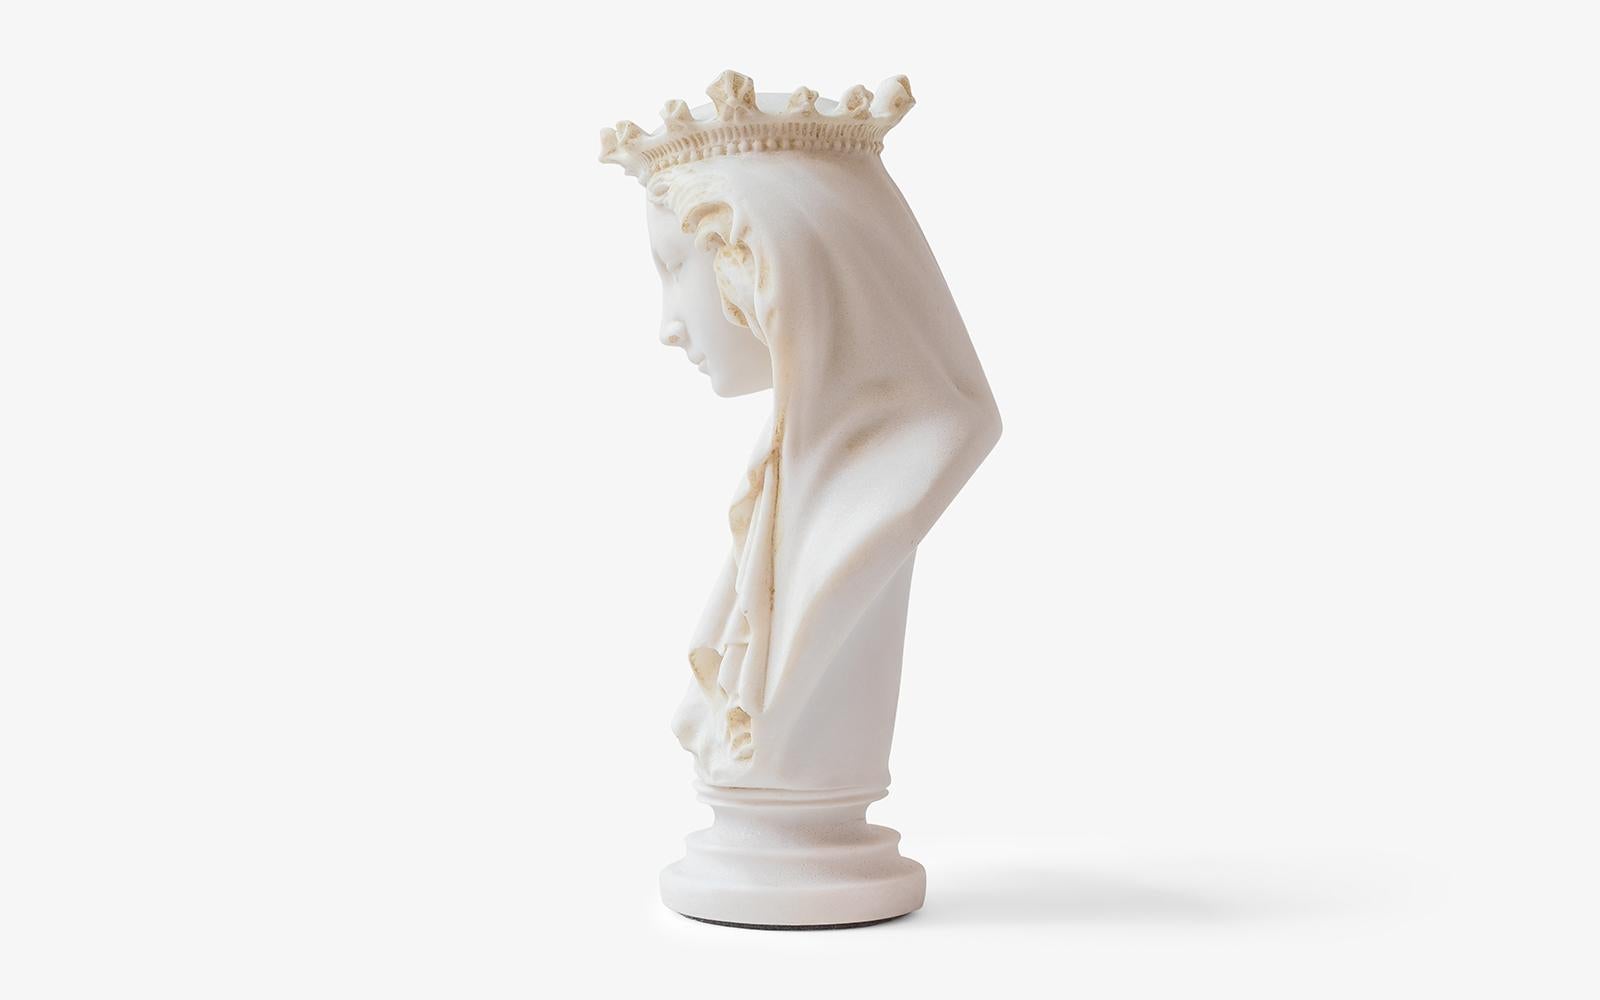 In Christian mythology, she is the mother of Jesus, also known as the Virgin Mary.

Weight: 1,5 kg

 -Produced from pressed marble powder.
-Produced from the original molds of the works from the museum.
-Can be used indoors and outdoors.
 